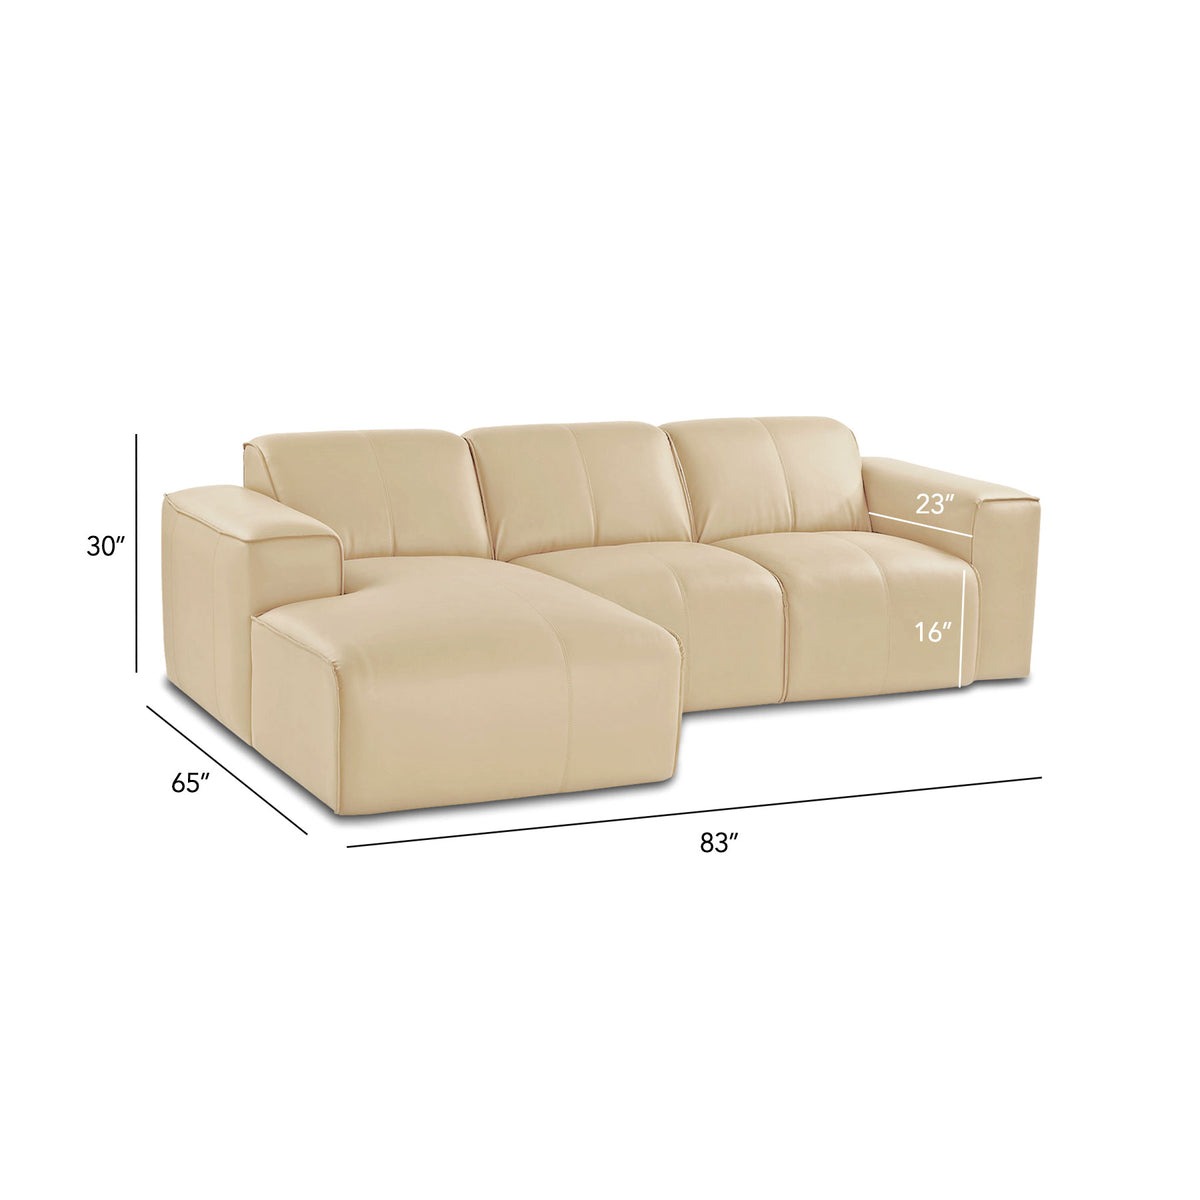 Werfo August 3-Seater Sofa Begi LHS (Left Hand Side) - H 30"x W 83" x D 65"